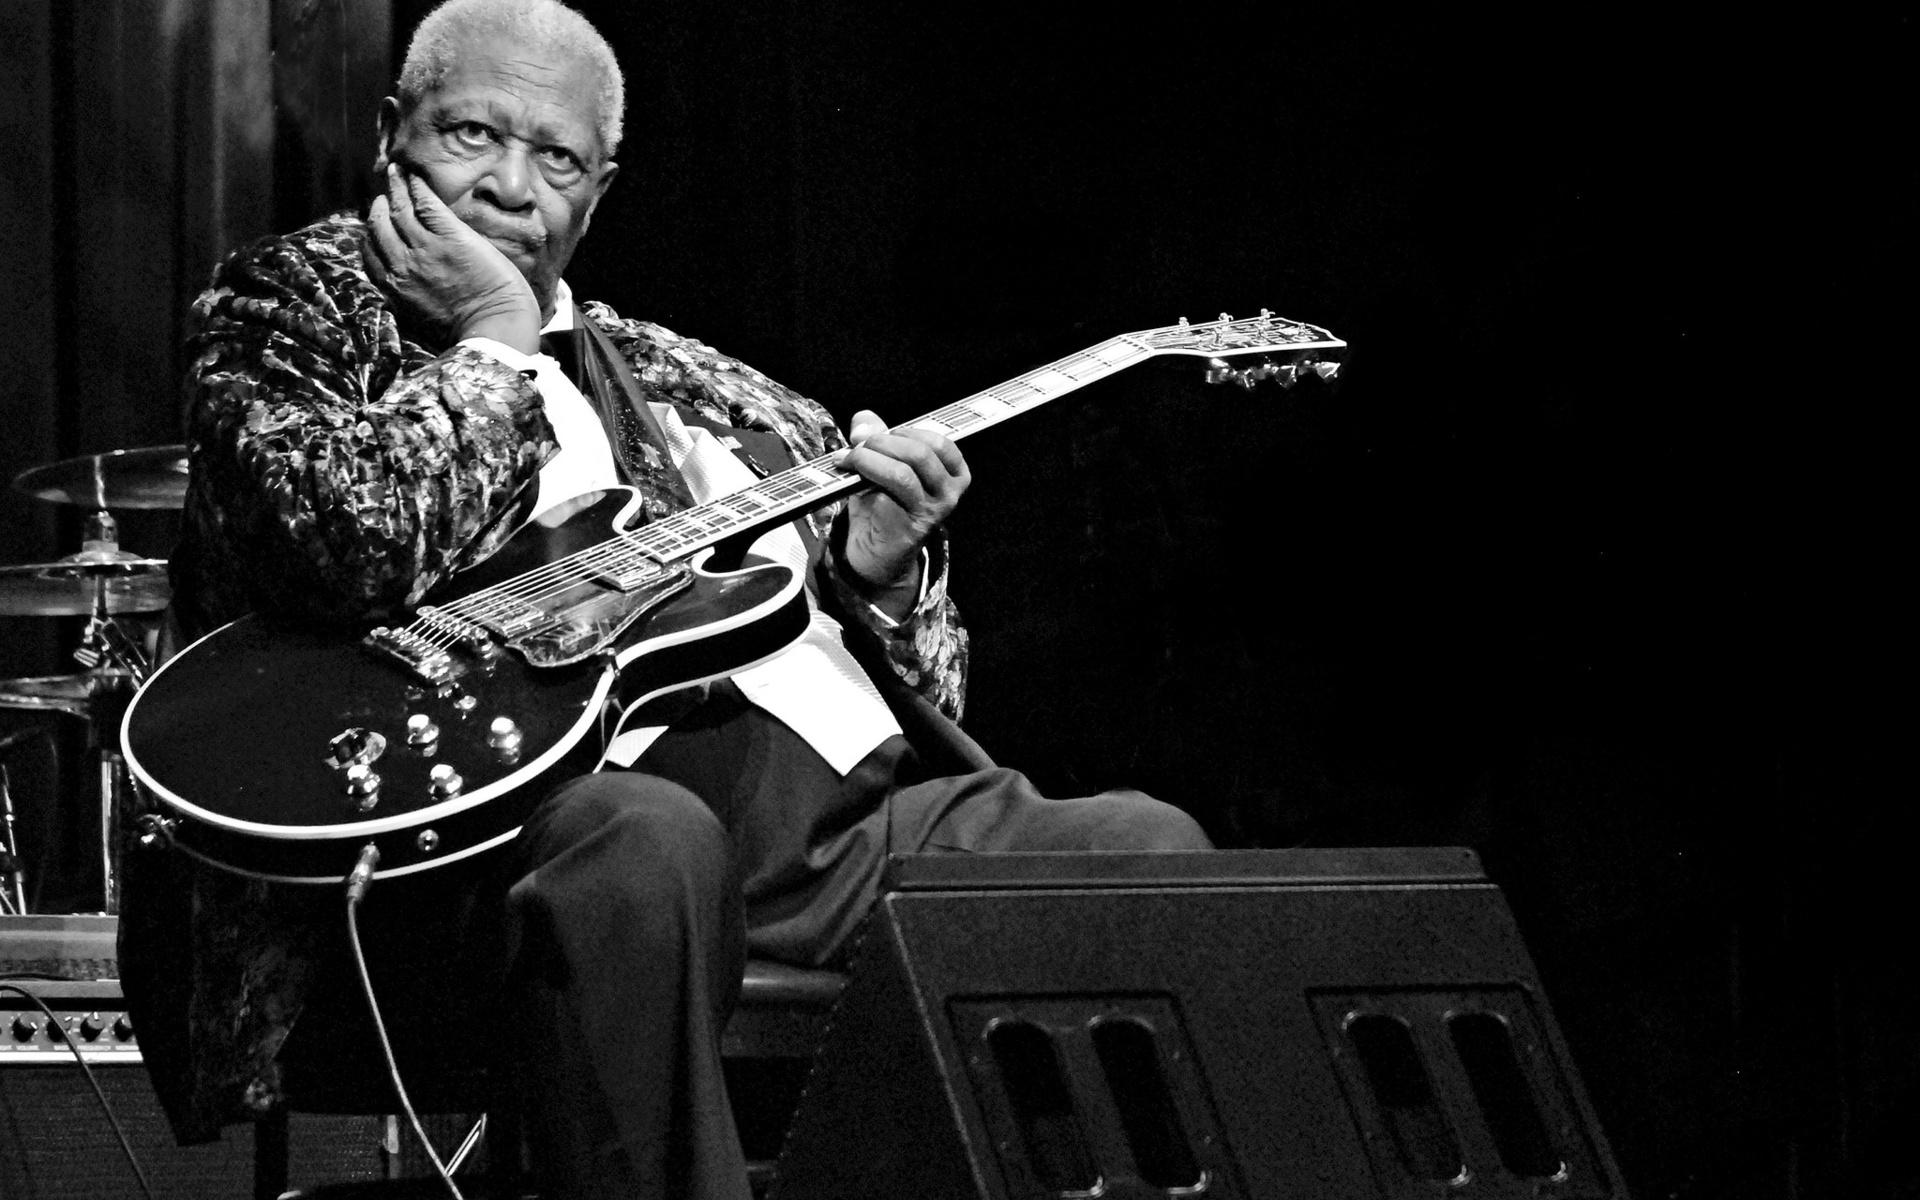 Guitar, Musician, Lucille, Stage Blues B. B. King Musician